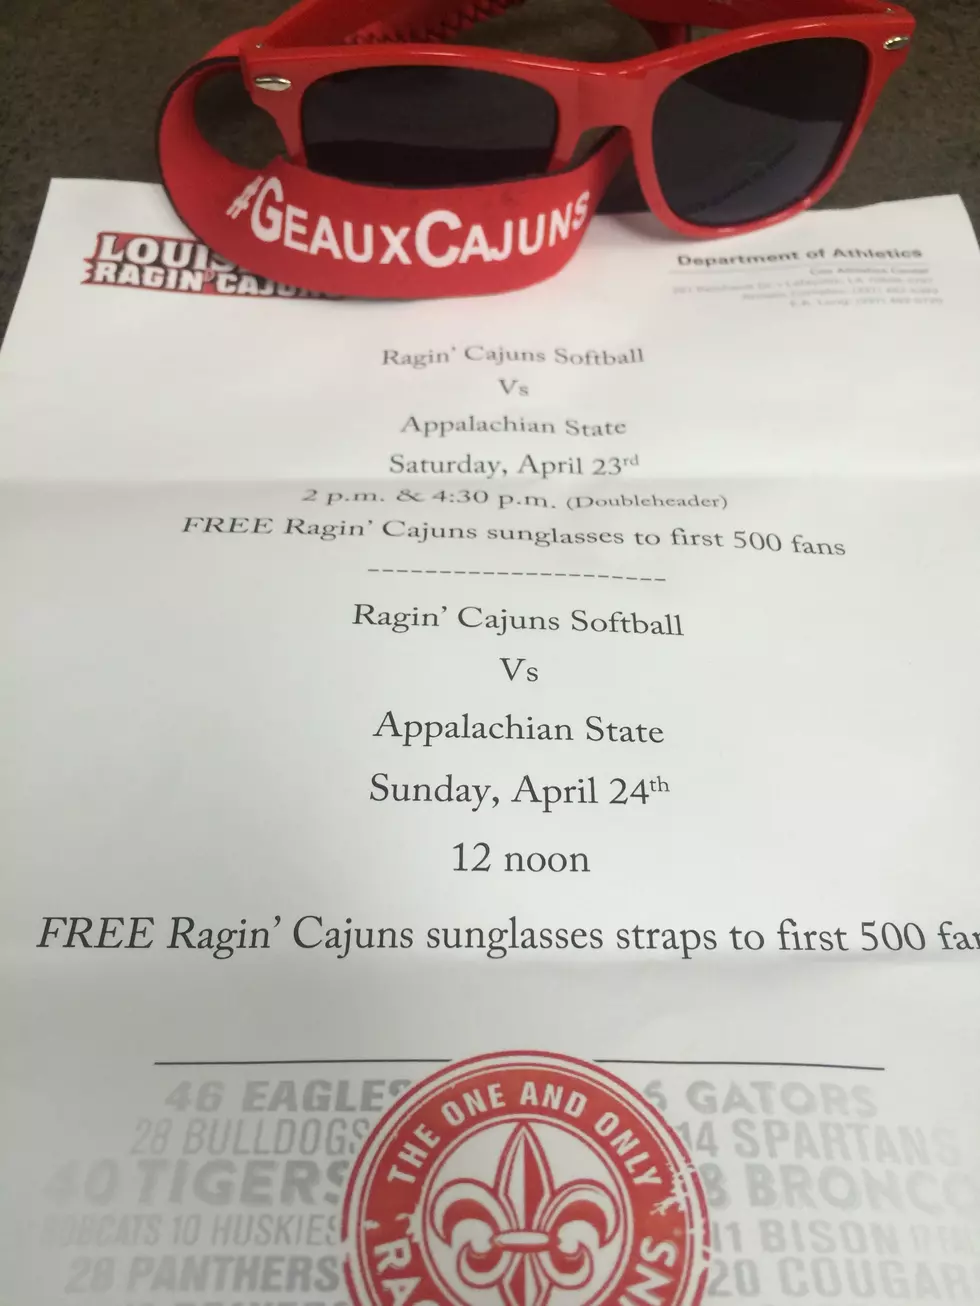 Free #GeauxCajuns Sunglasses and Strap At UL Softball Game Saturday And Sunday